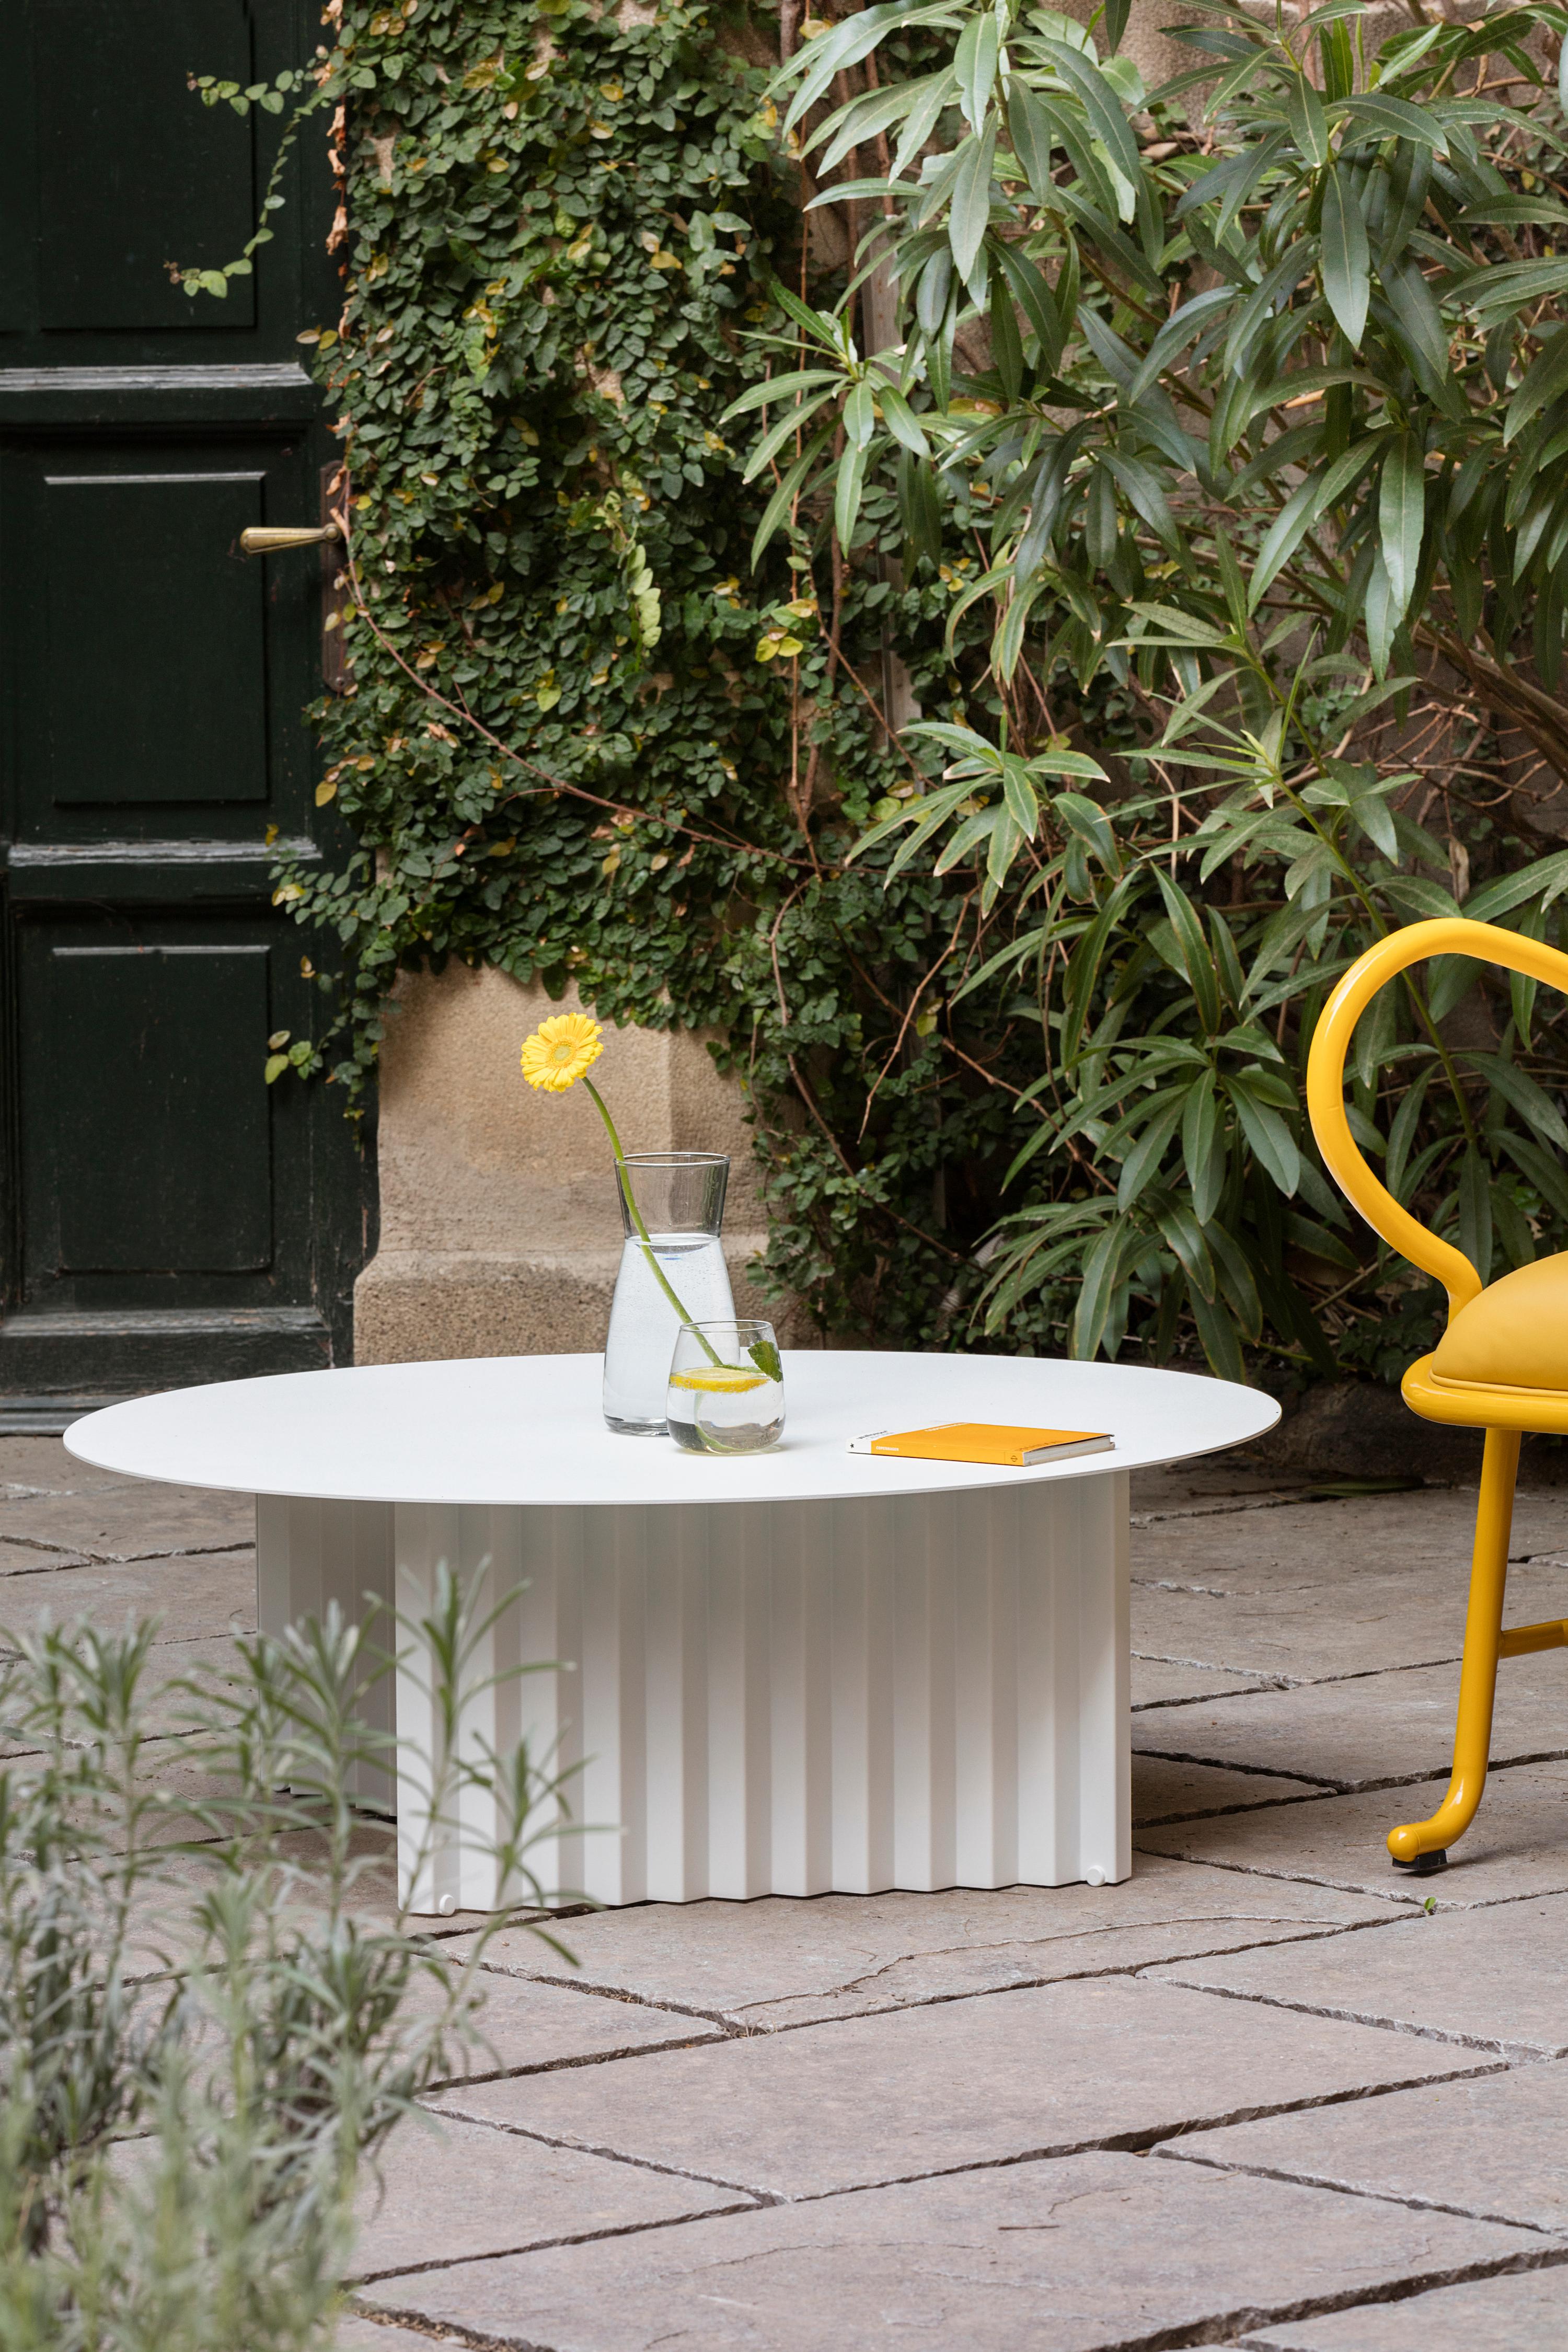 Plec is a collection of coffee and side tables that are as happy together as they are alone. With their accordion-shaped legs, these Plec round tables love creating light and shade effects at any time of day. The Plec table has a steel structure